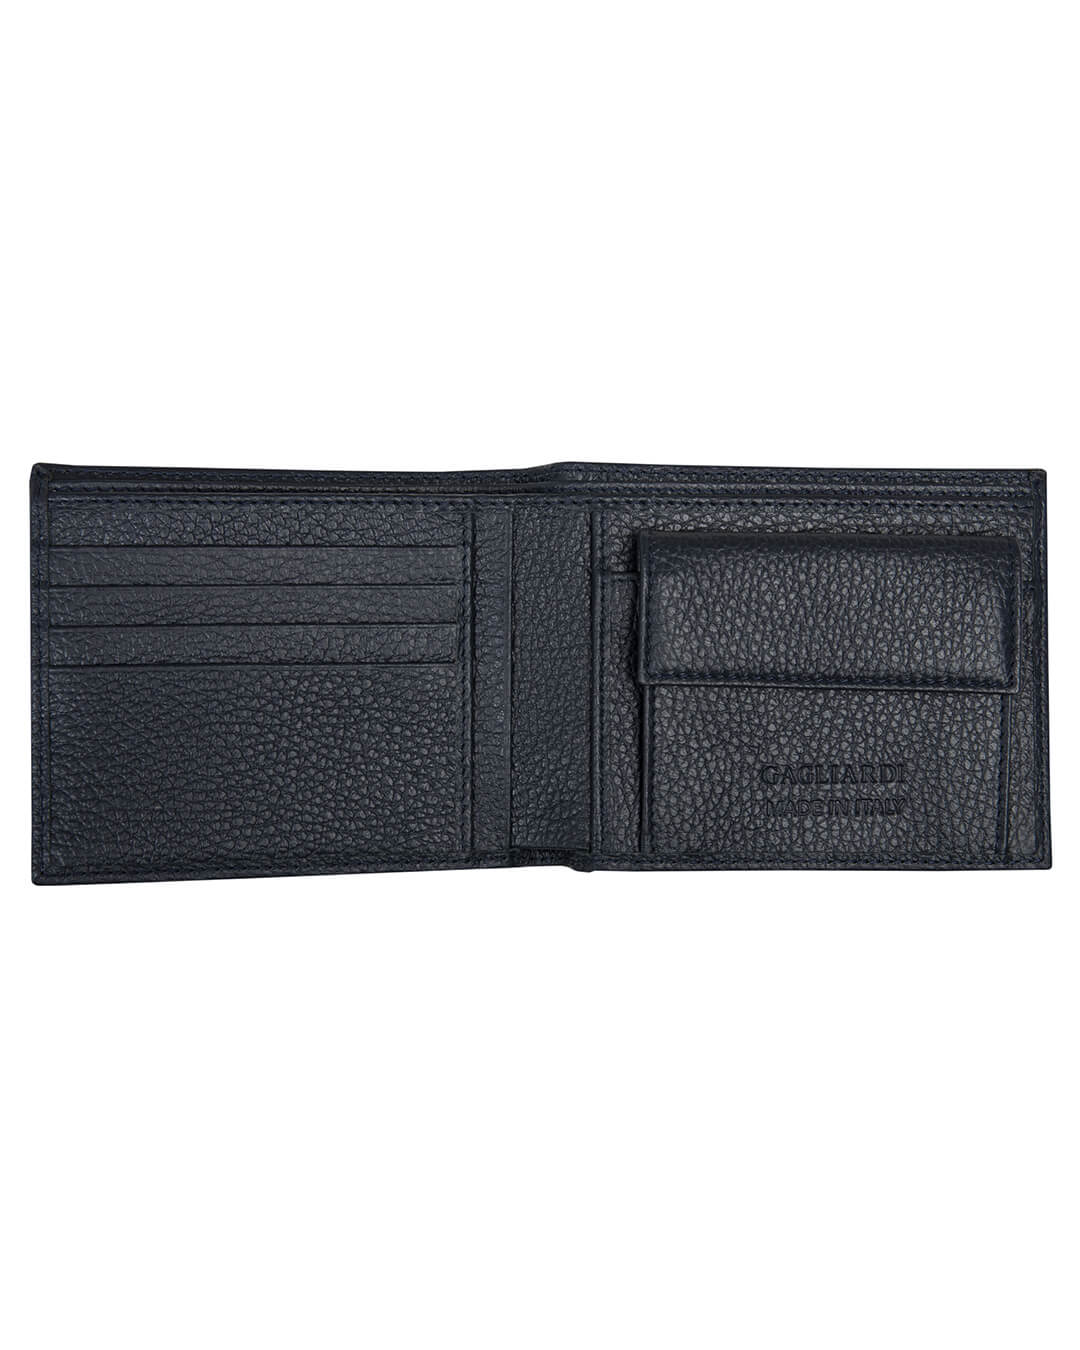 Gagliardi Wallets One Size Gagliardi Wallet Navy Leather With Coin Pocket